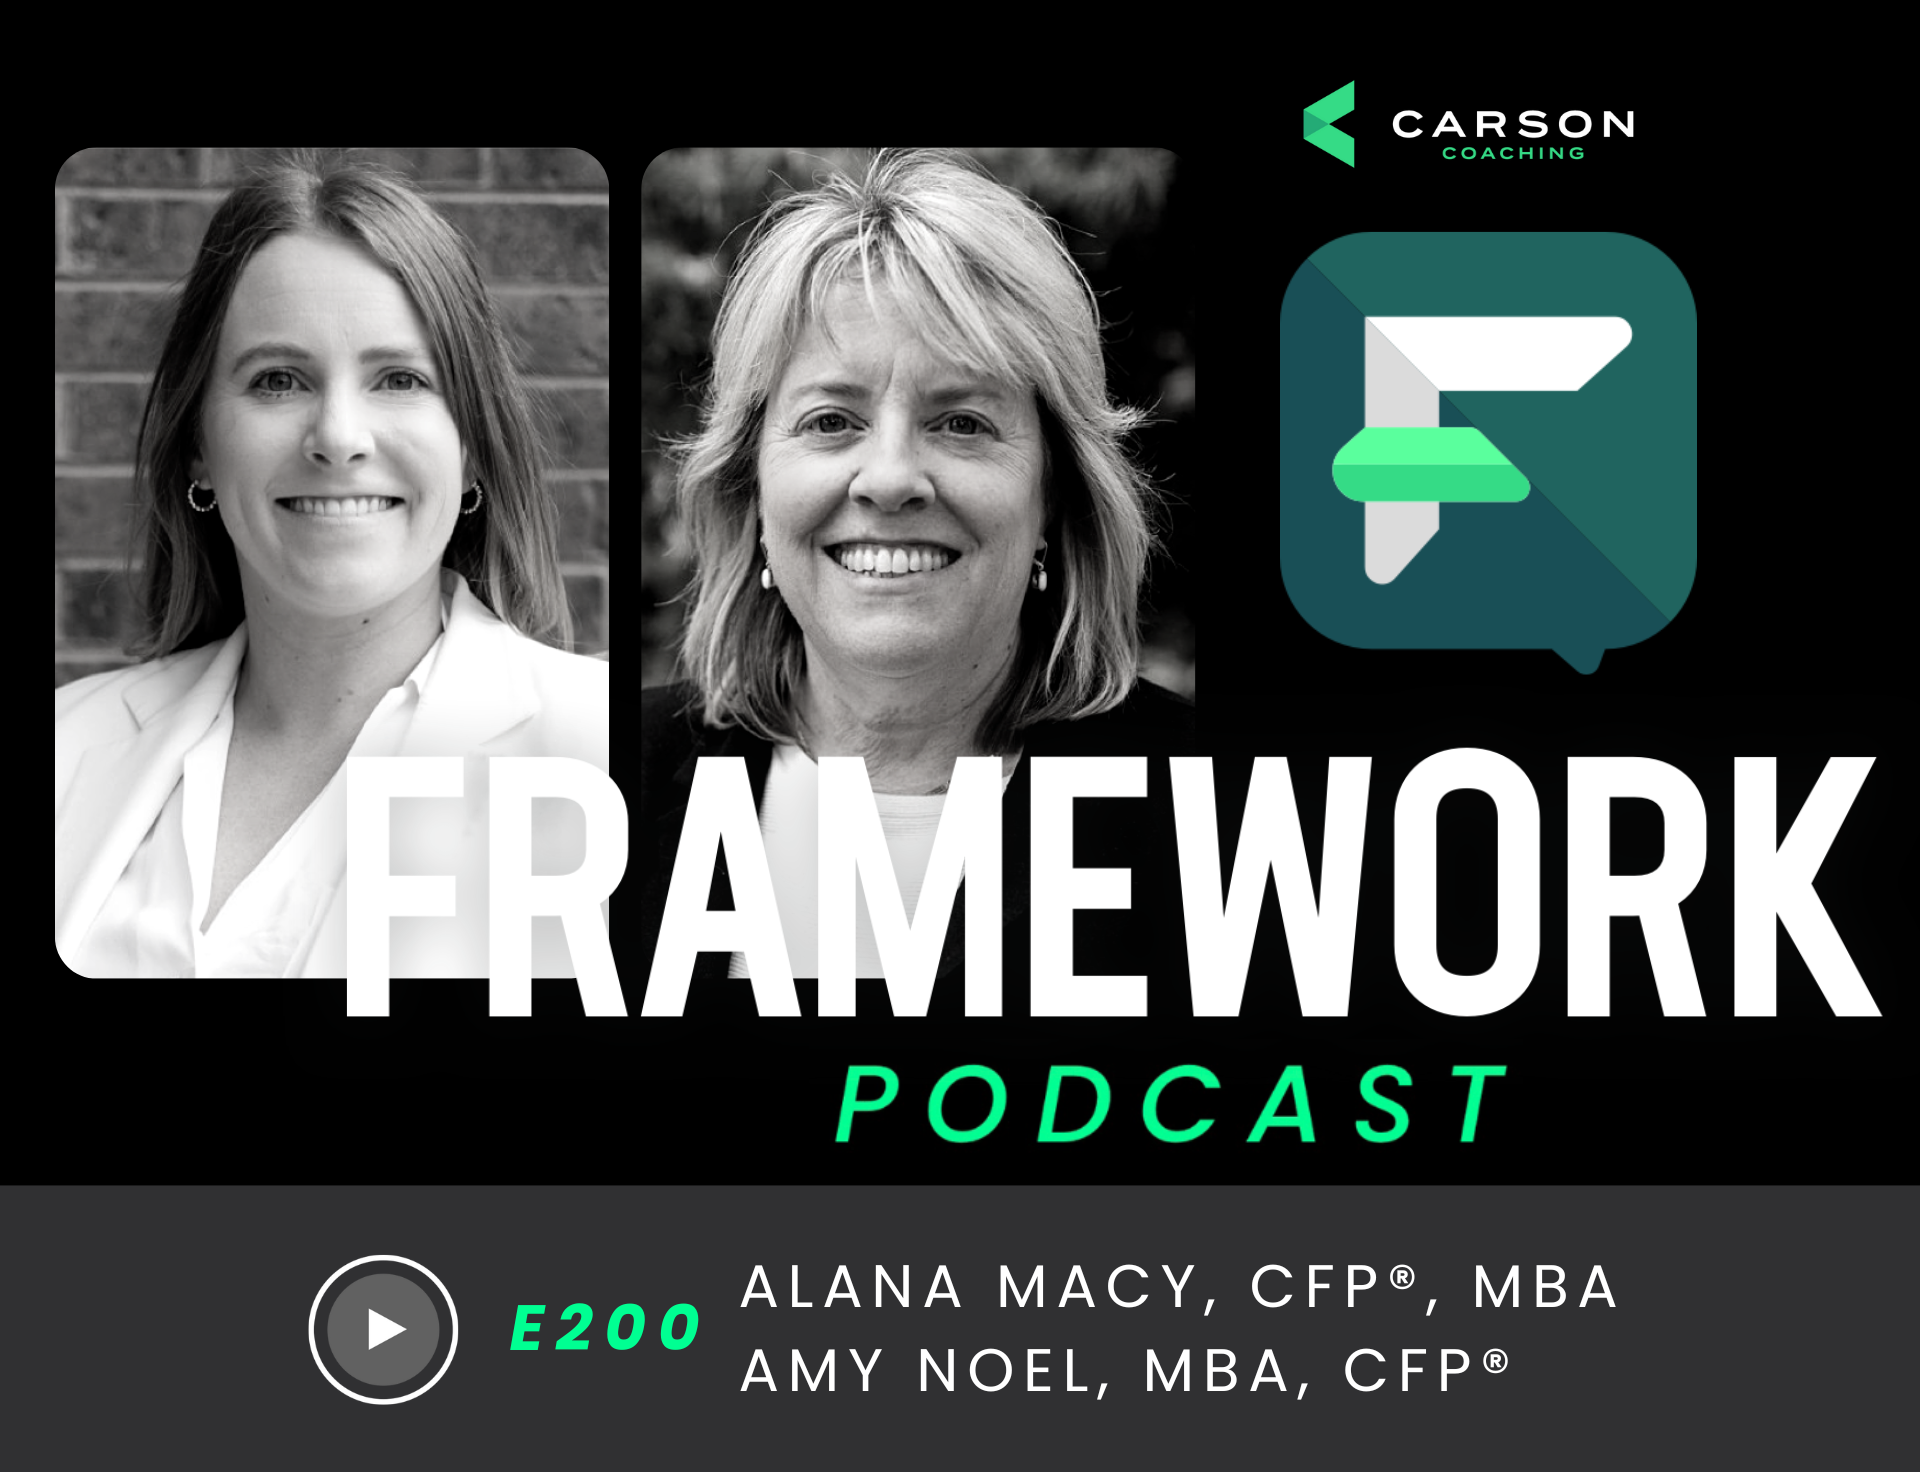 Alana Macy and Amy Noel: Building a Successful Firm